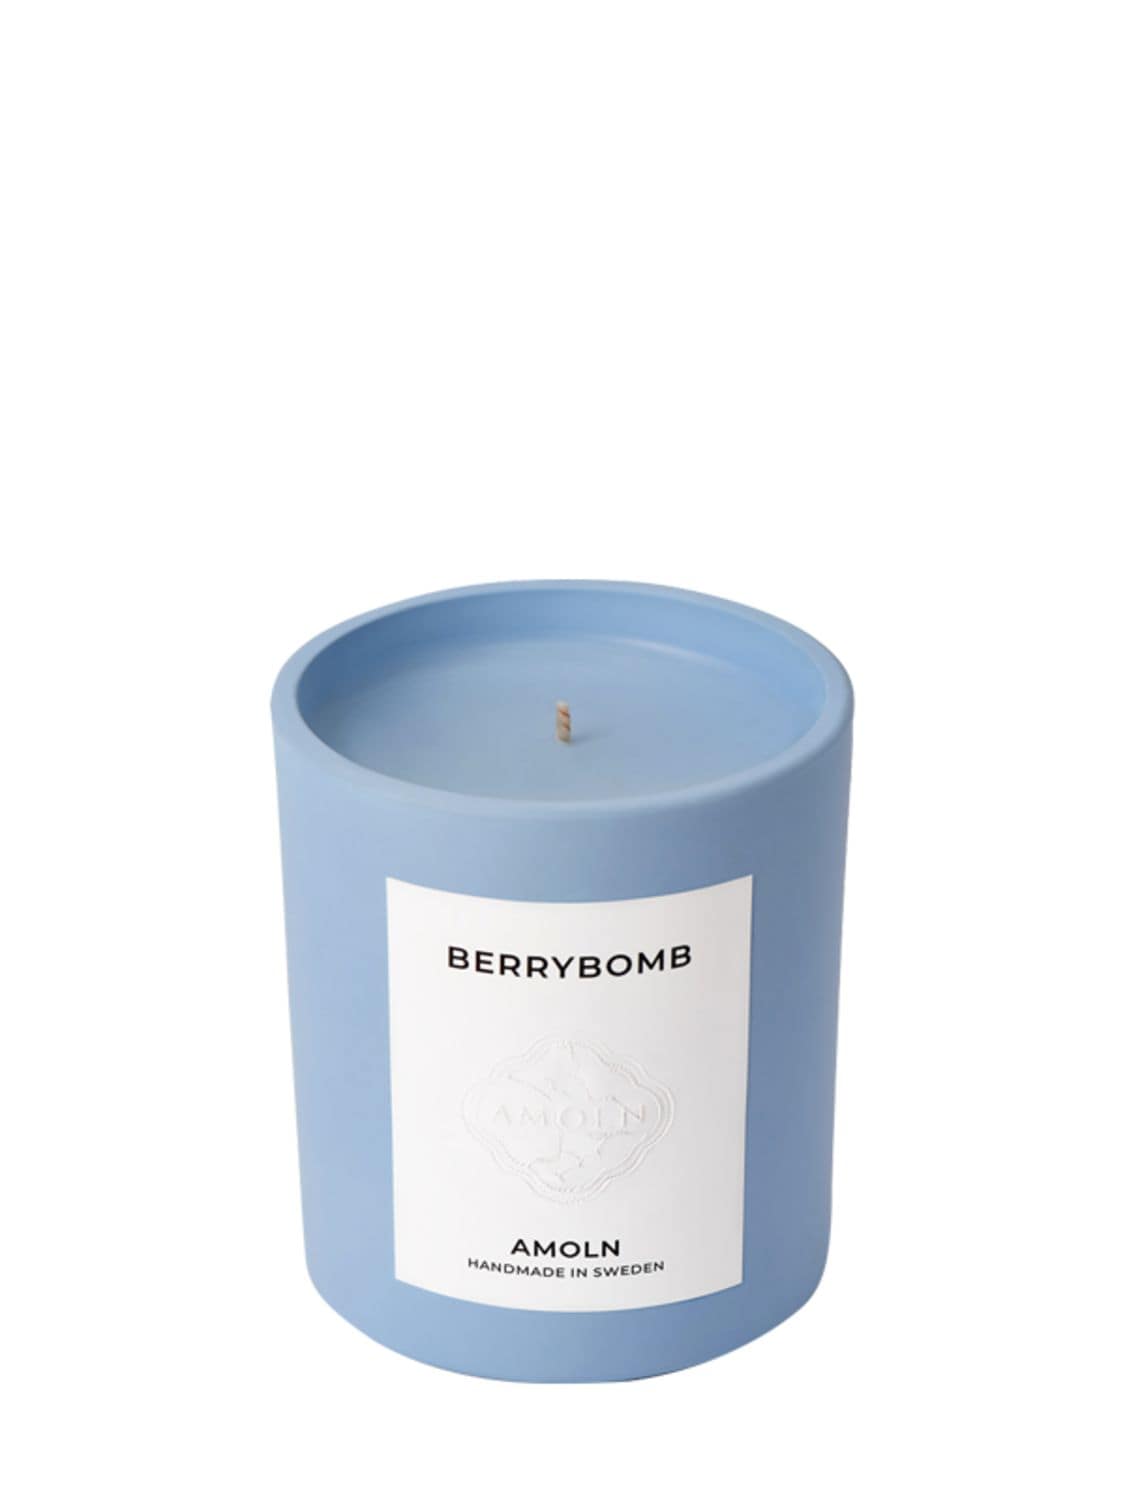 Amoln Berrybomb Scented Candle In Blue